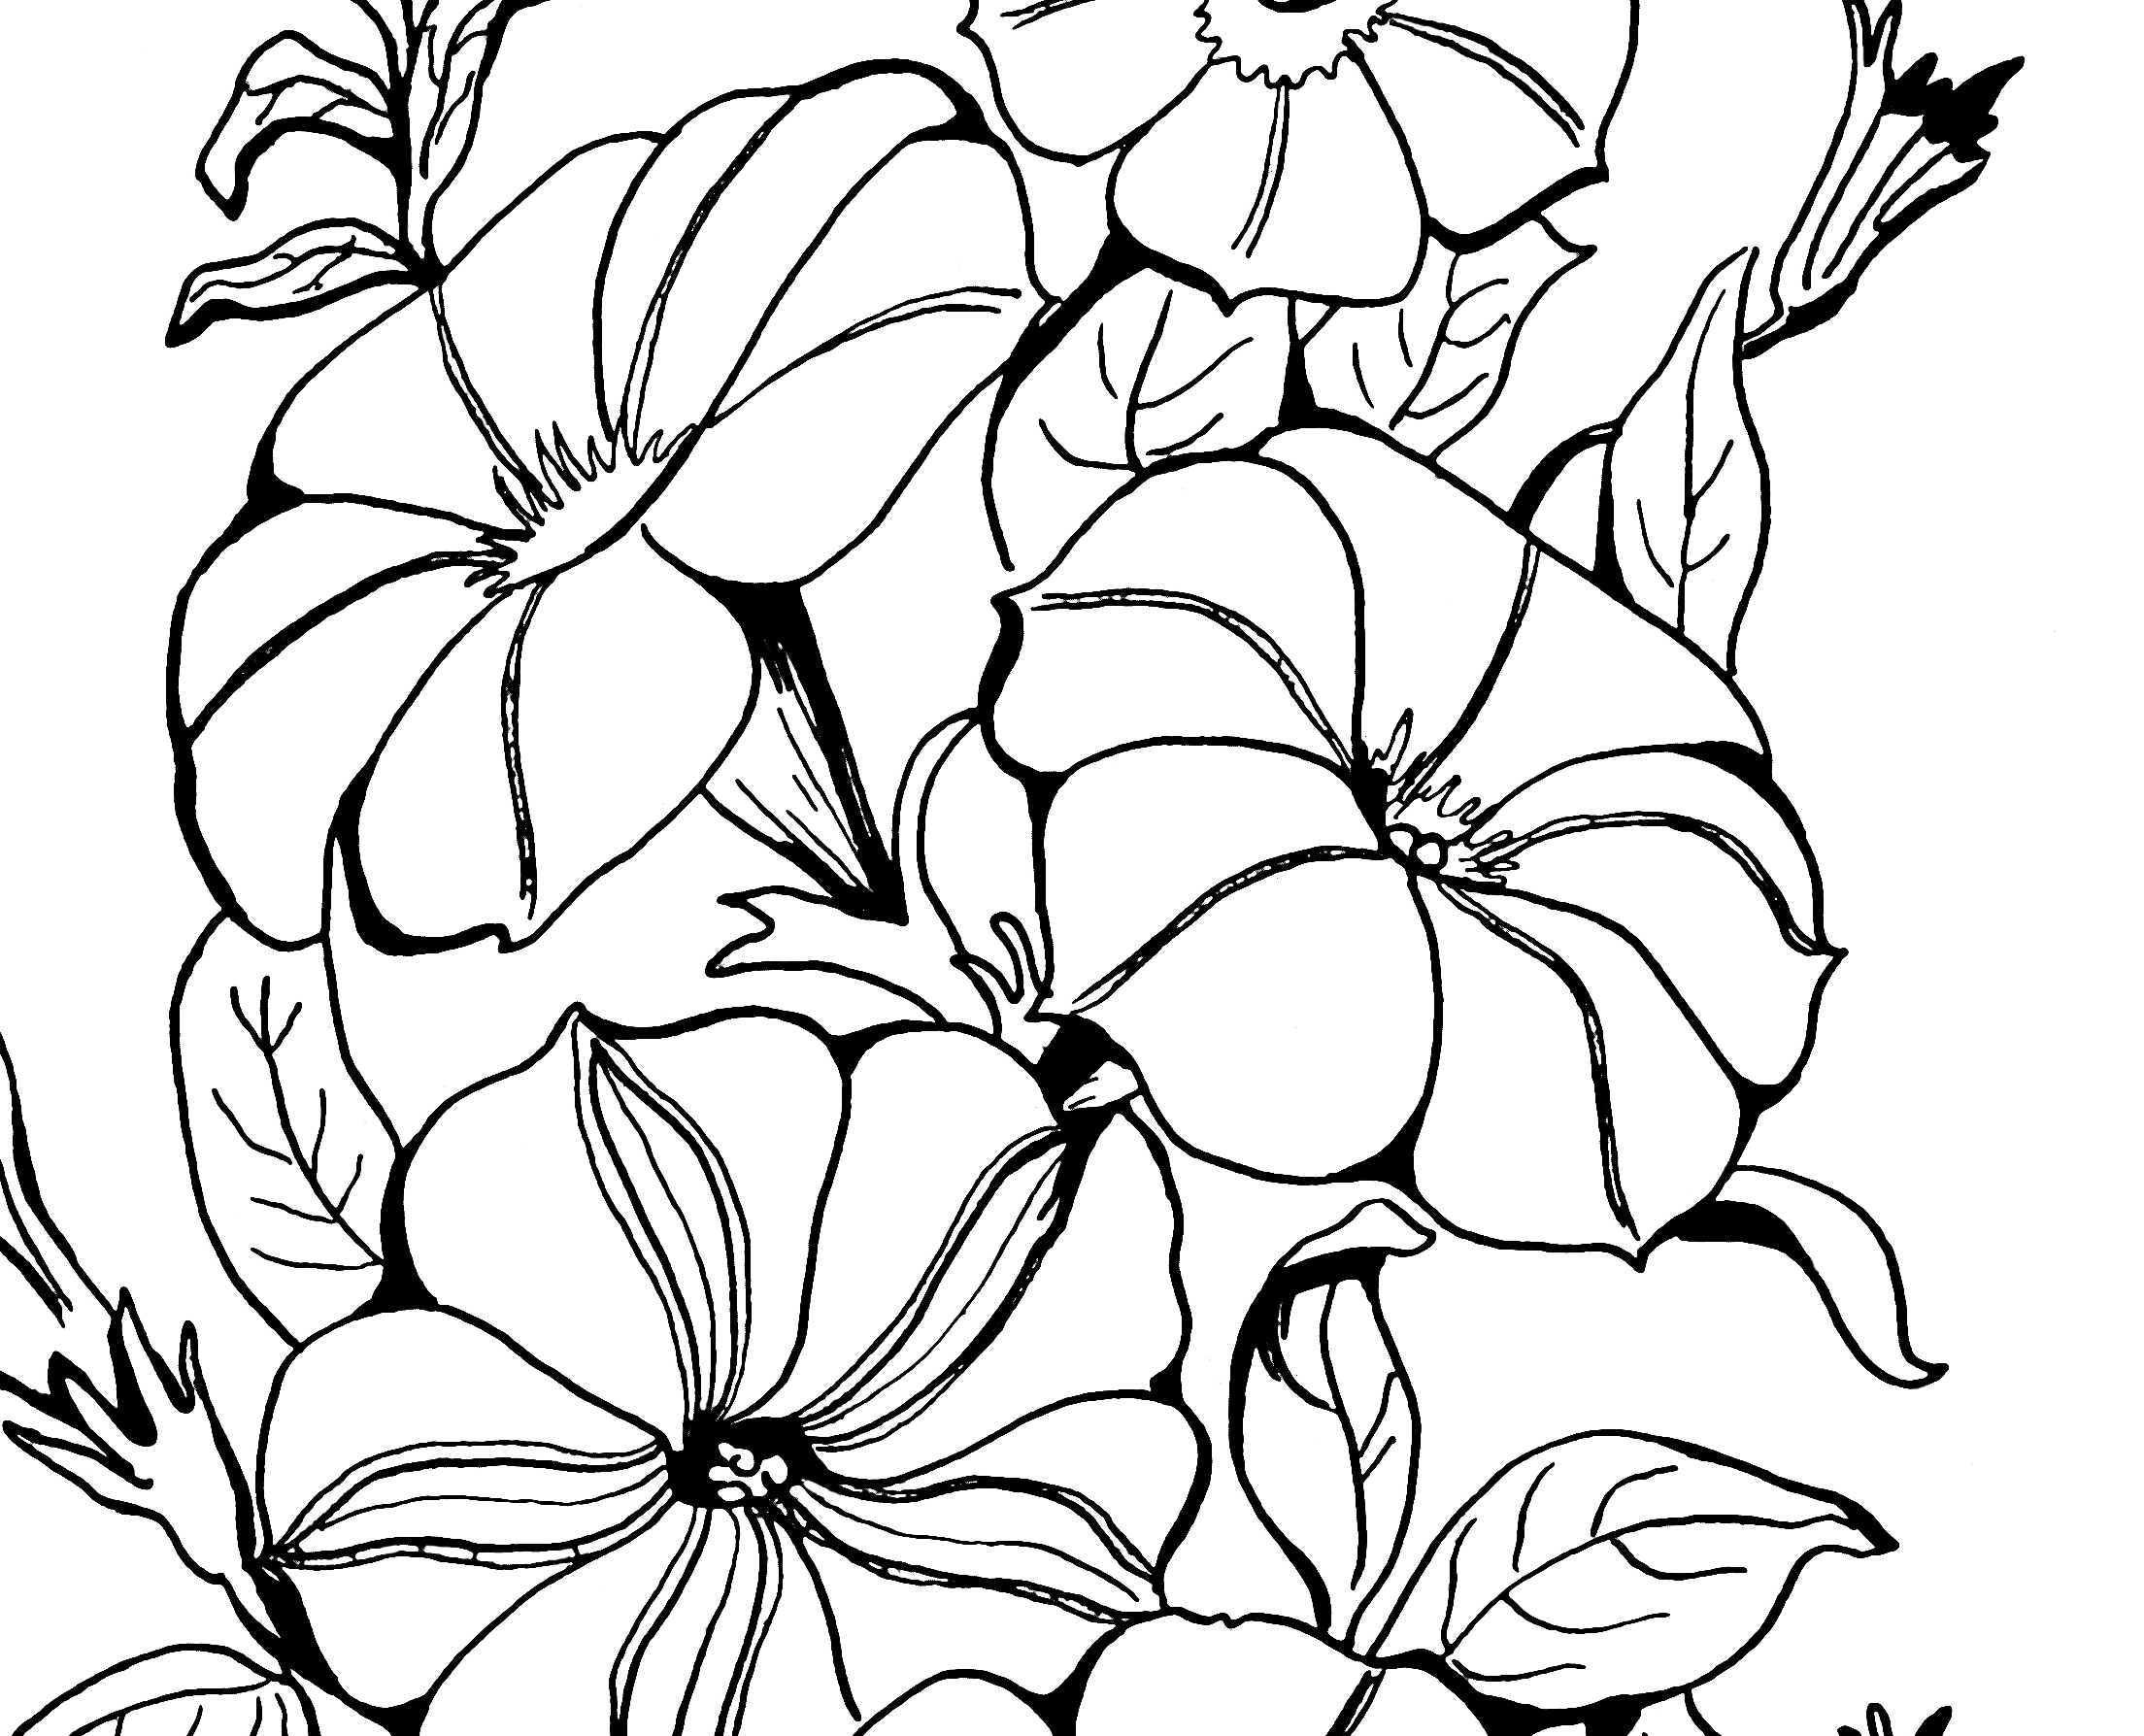 Adult Coloring Page Petunias! 